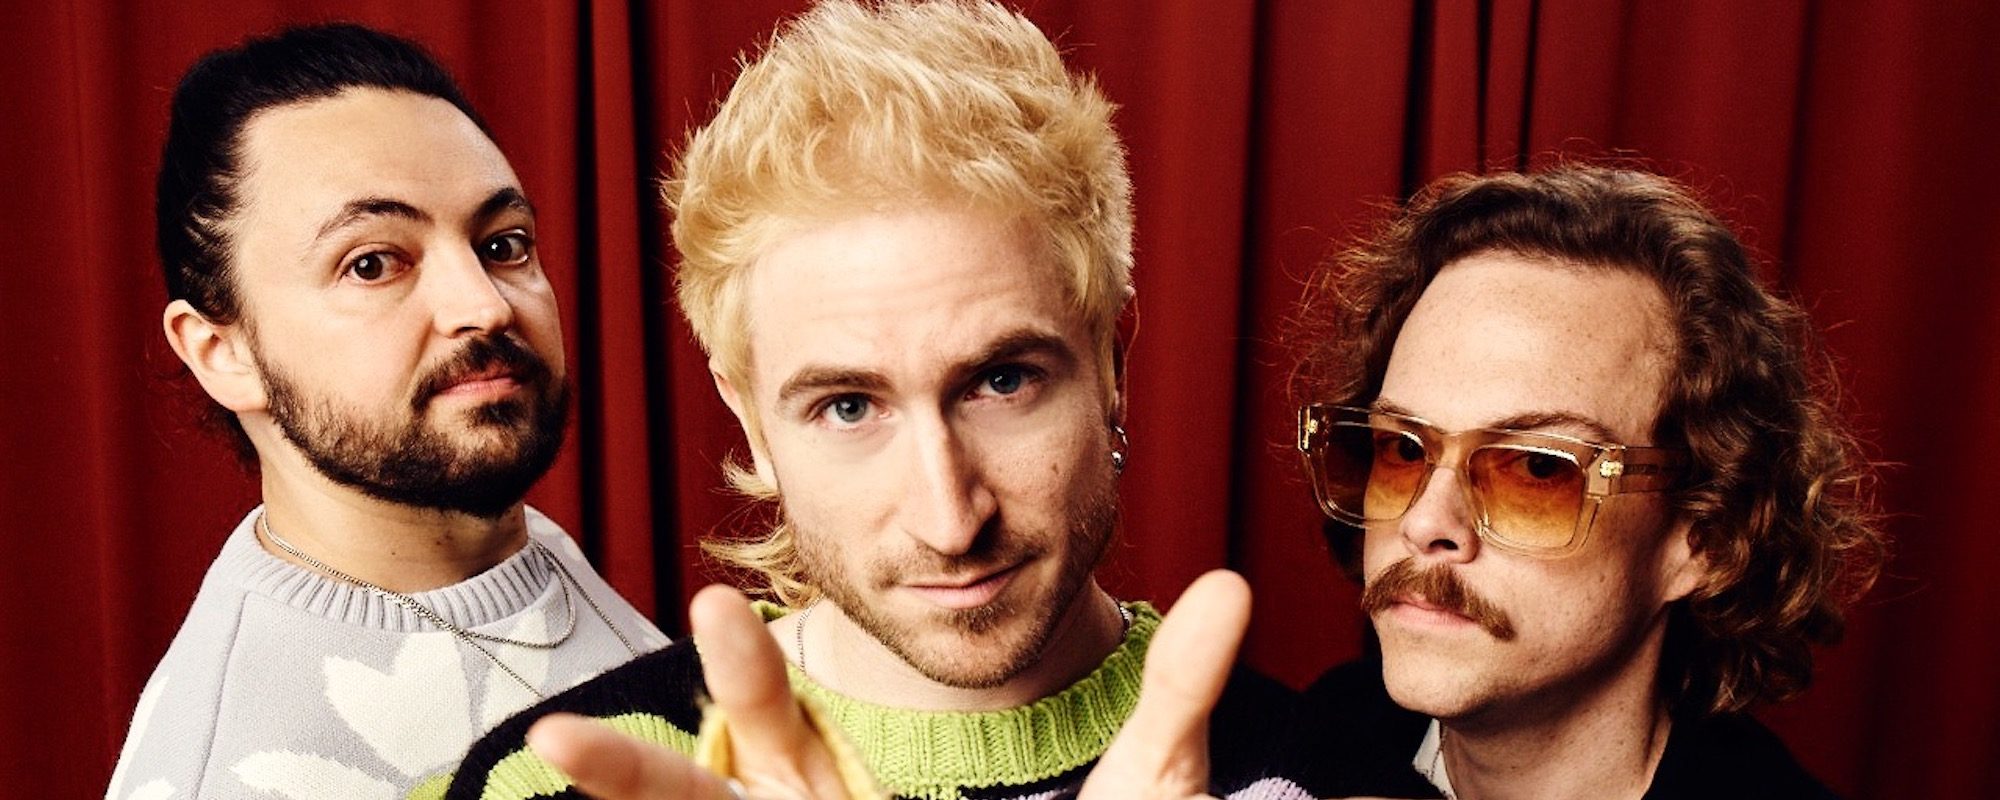 Walk the Moon Return with Three New Songs, “Can You Handle My Love??” Video